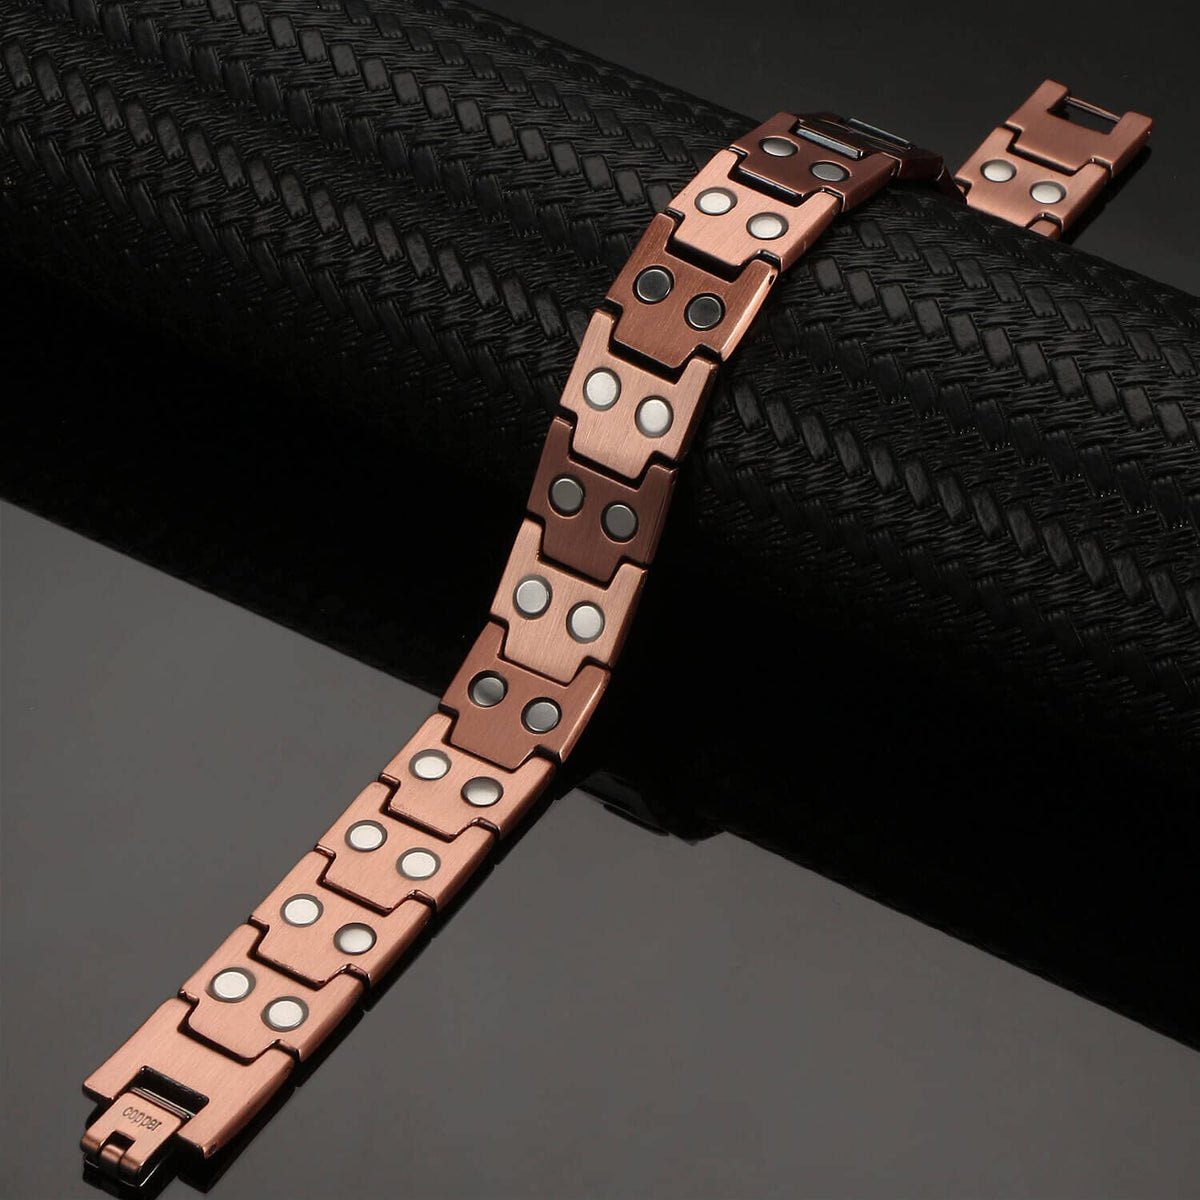 My Copper Pure Copper Magnetic Therapy Link Bracelet, professional Design, Hypoallergenic With Free Link Removal Tool